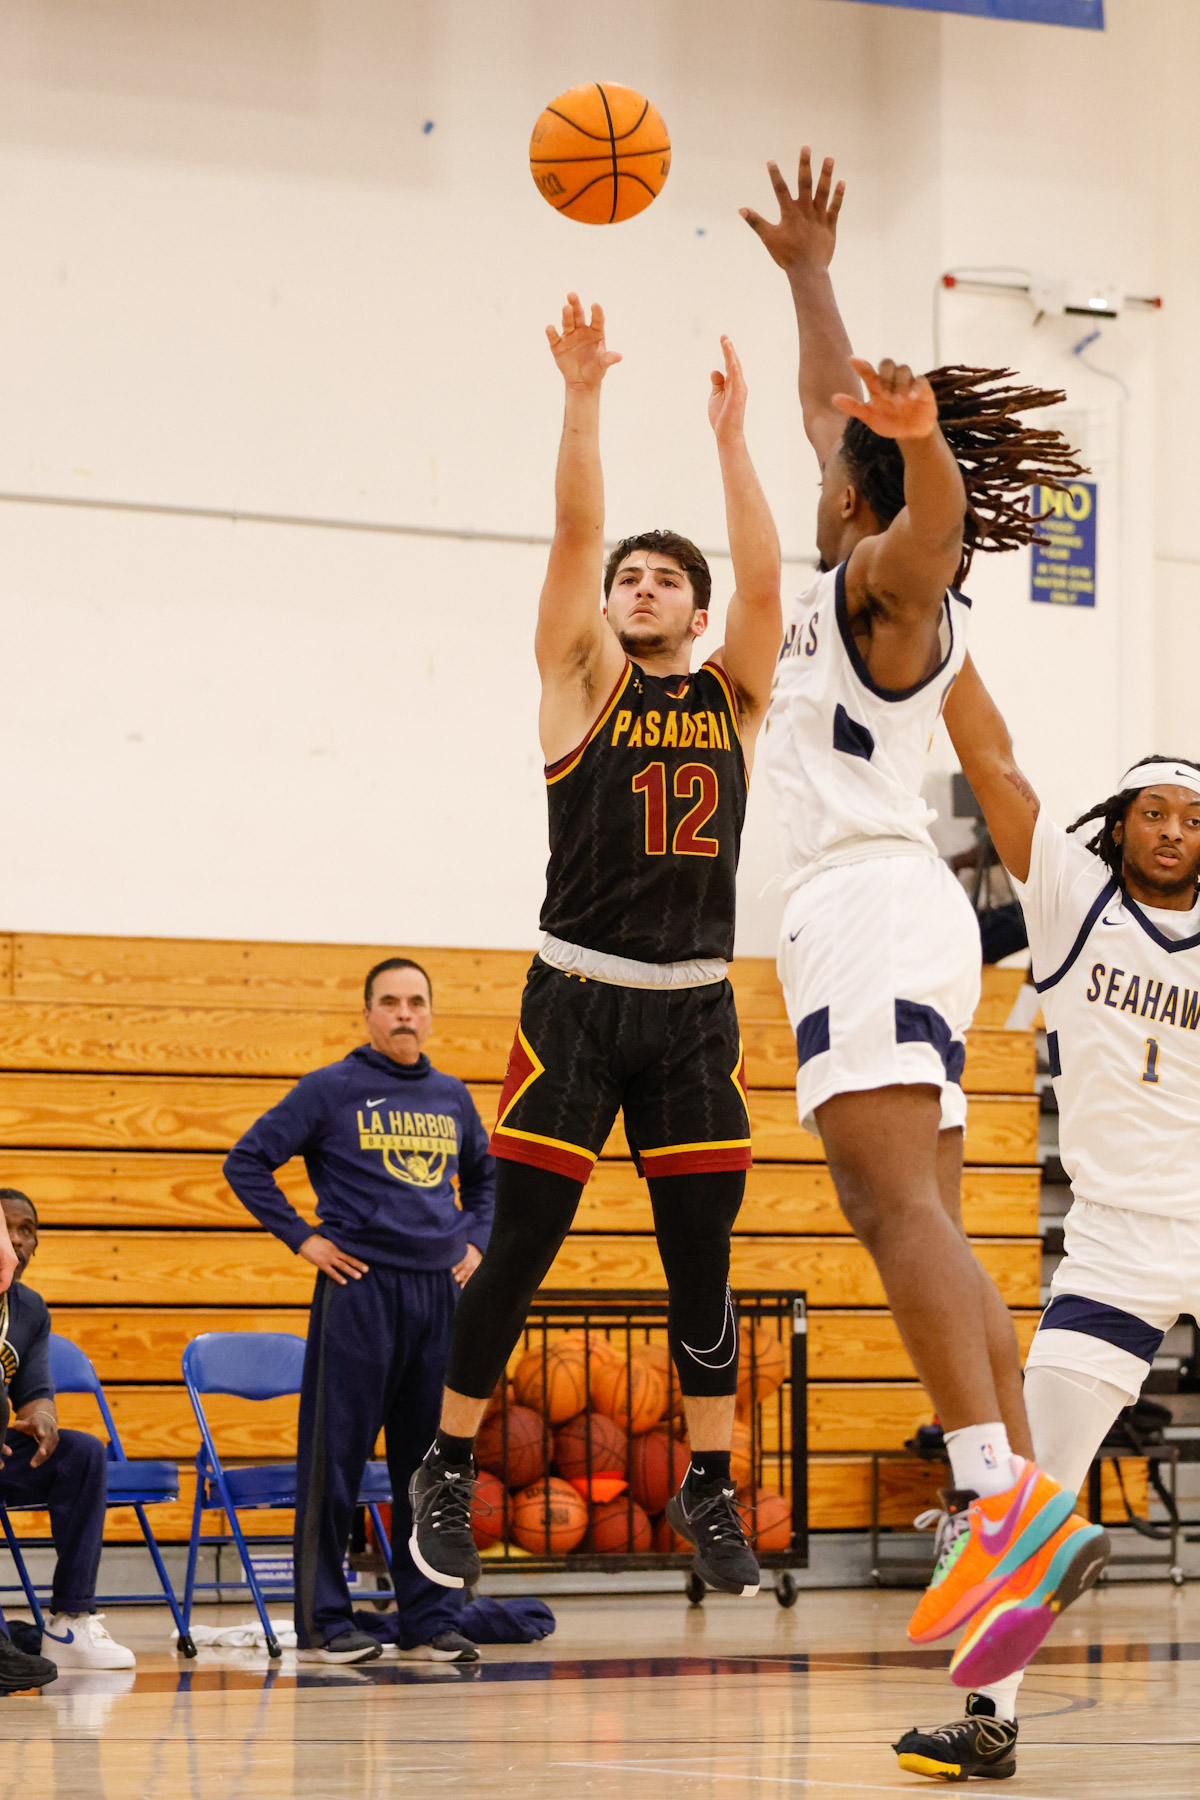 Shant Chenorhavorian launches this basket during PCC's win at LA Harbor on Wednesday night (photo by Richard Quinton).